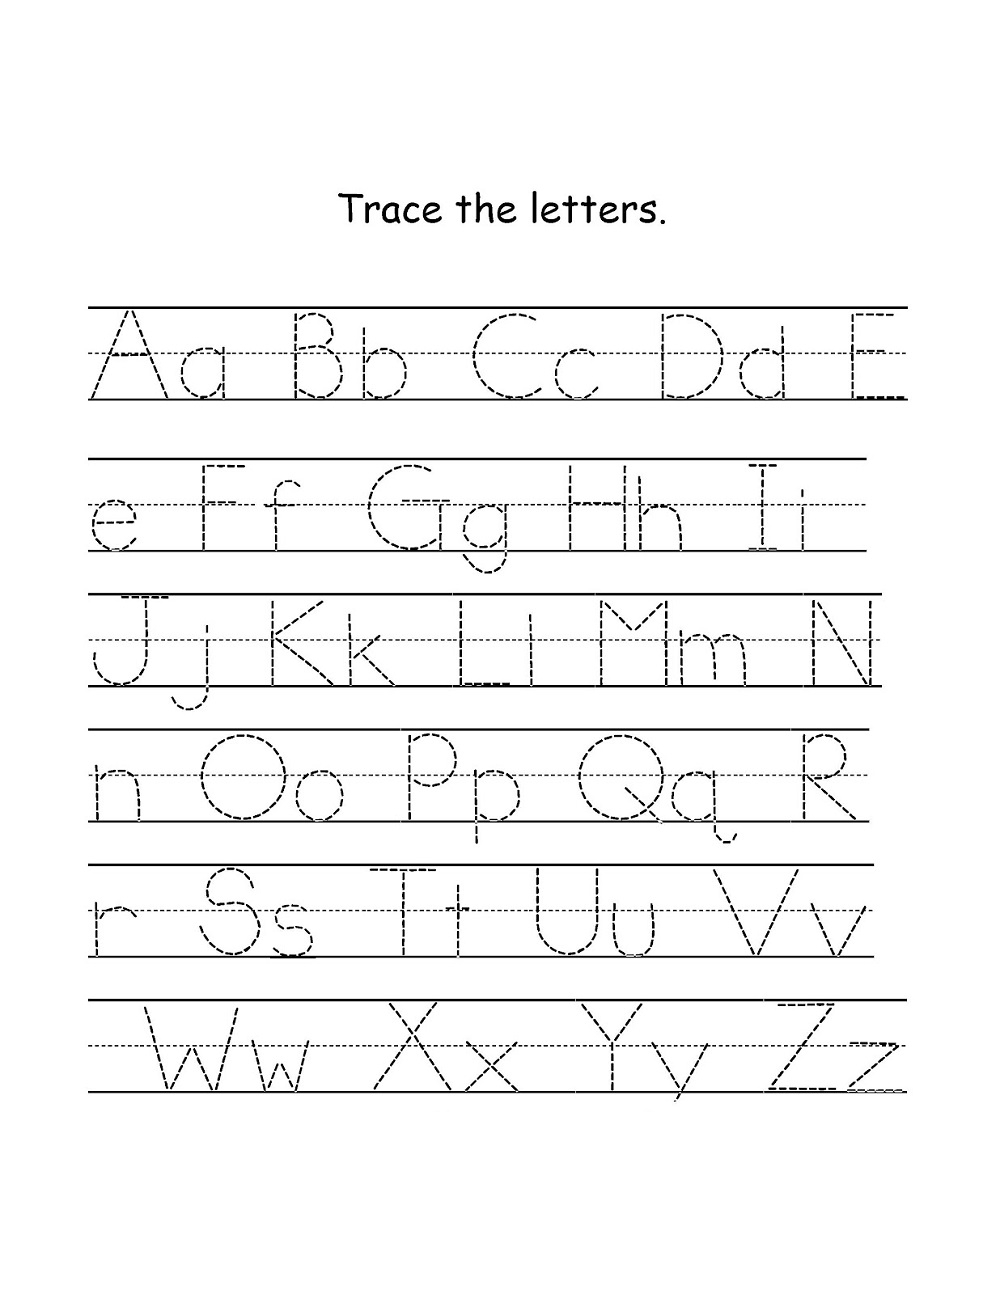 tracing letters worksheets a z tracinglettersworksheetscom